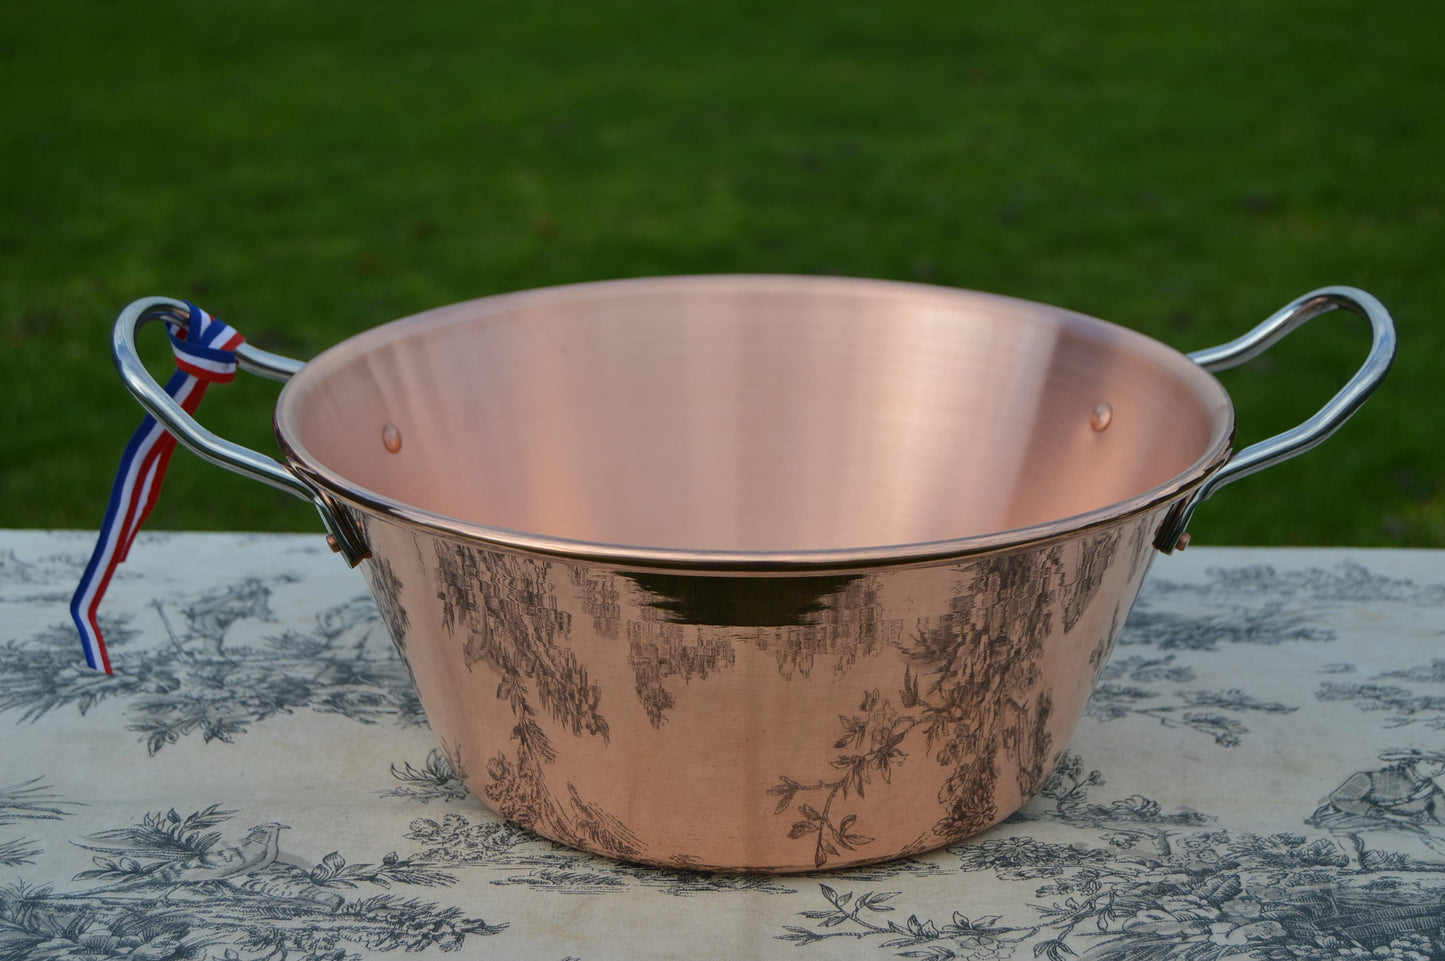 New NKC 28 cm Copper Jam Pan Normandy Kitchen Copper Jam Jelly Pan 28cm 11" Rolled Top Stainless Steel Handles New Normandy Kitchen